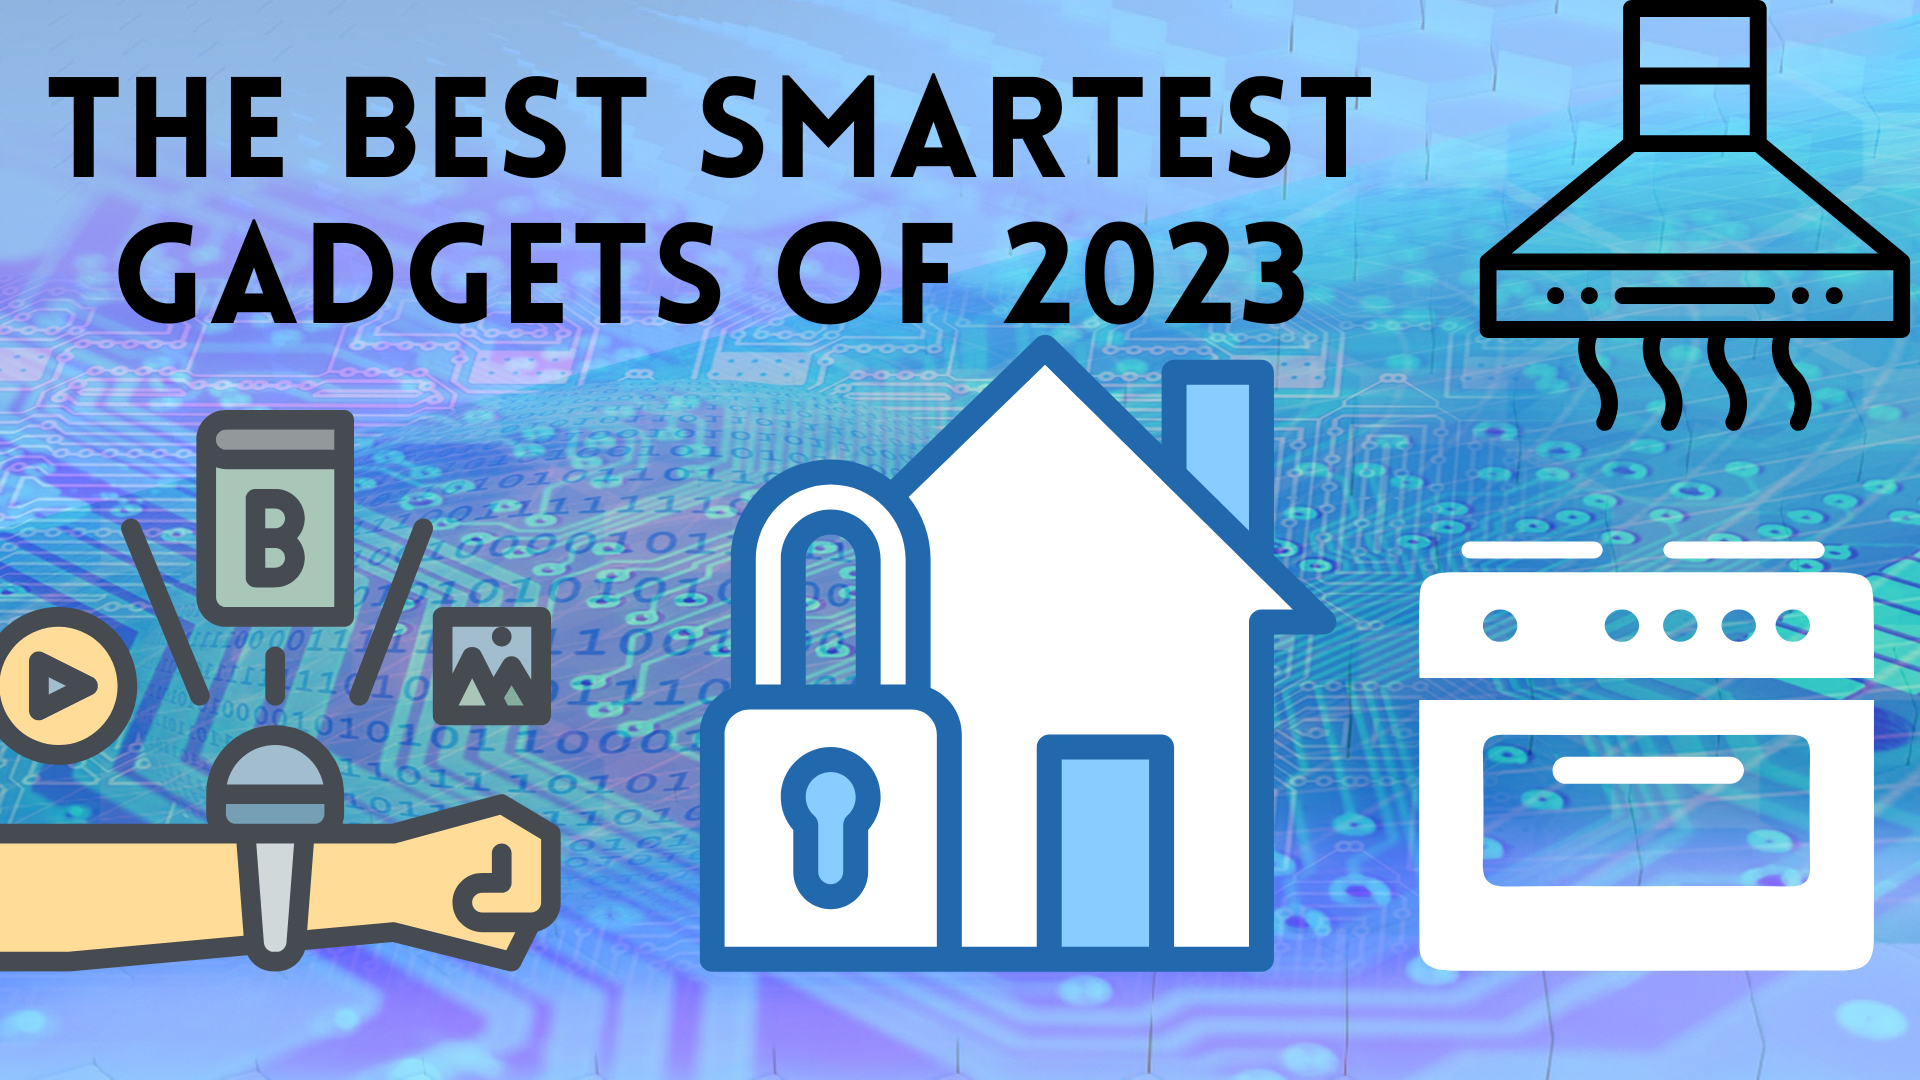 The Best Smartest Gadgets of 2023